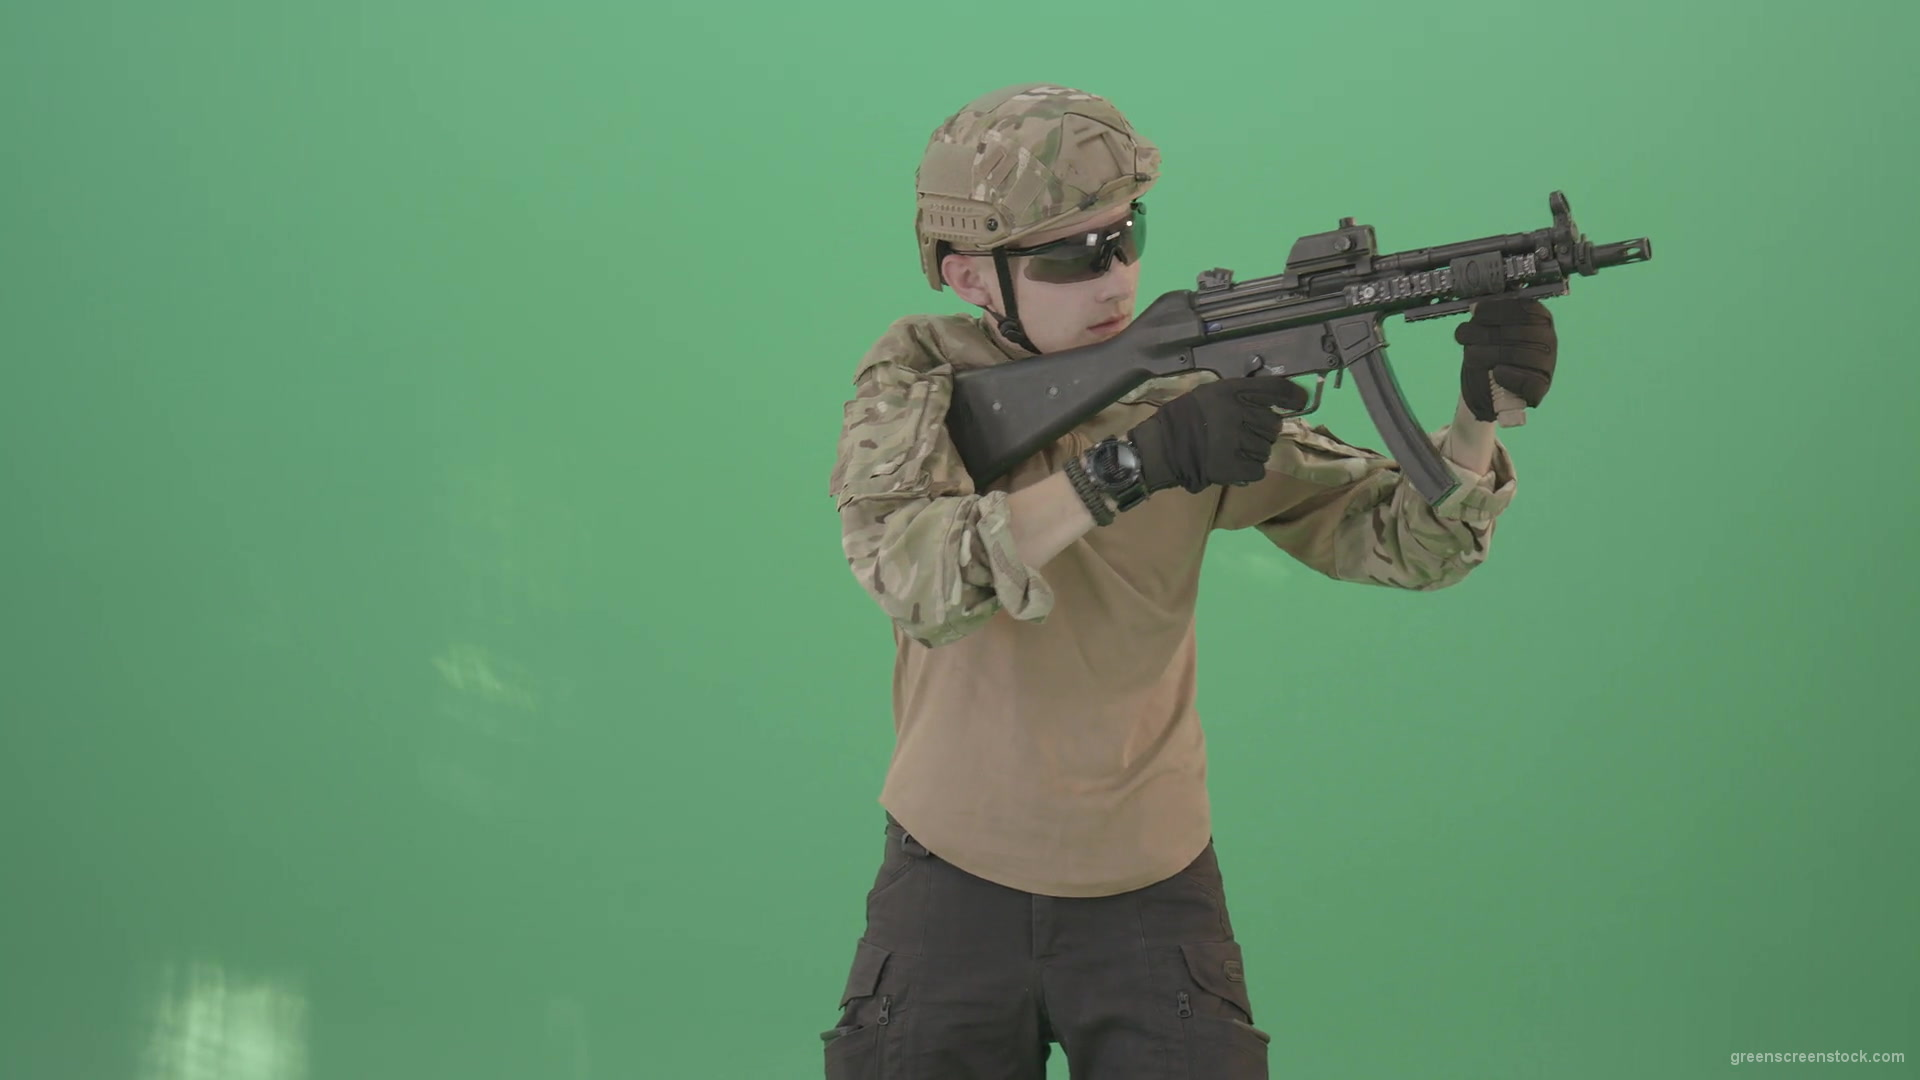 Soldier-in-army-uniform-shooting-with-gun-fire-machine-isolated-on-green-screen-4K-Video-Footage-1920_008 Green Screen Stock